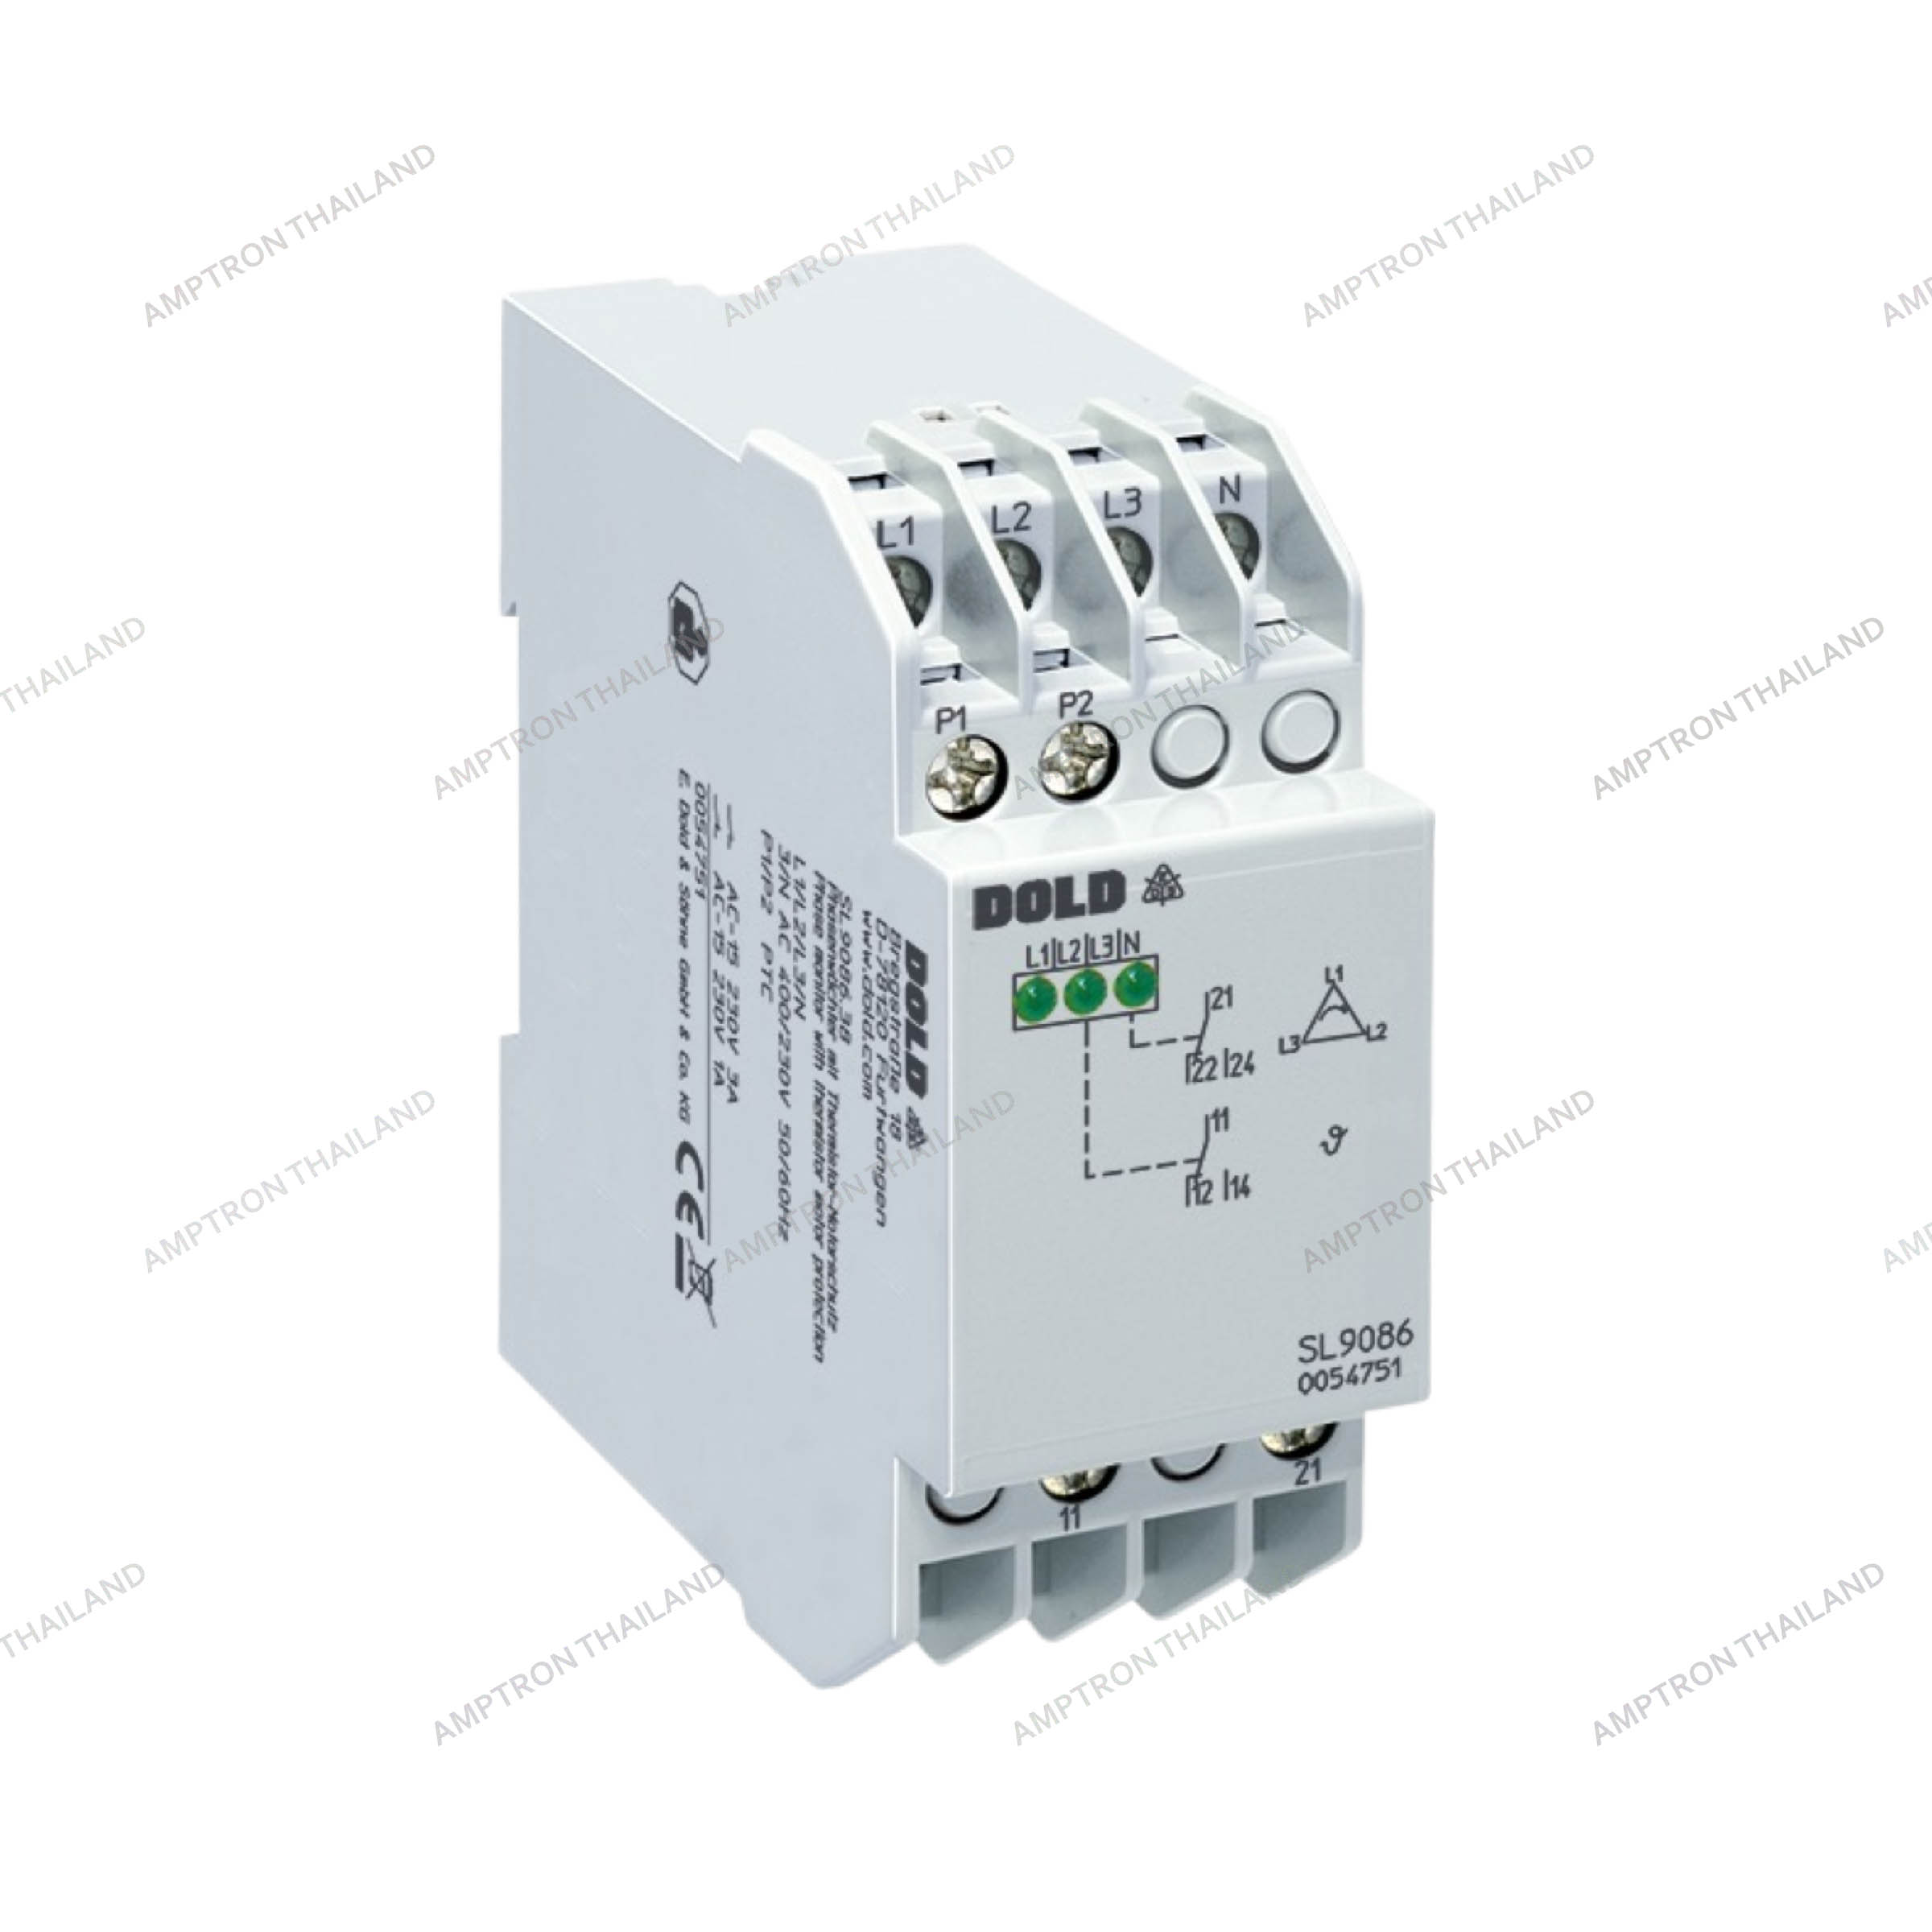 SL 9086 Varimeter  PRO Phase Monitor with Thermistor Motor Protection